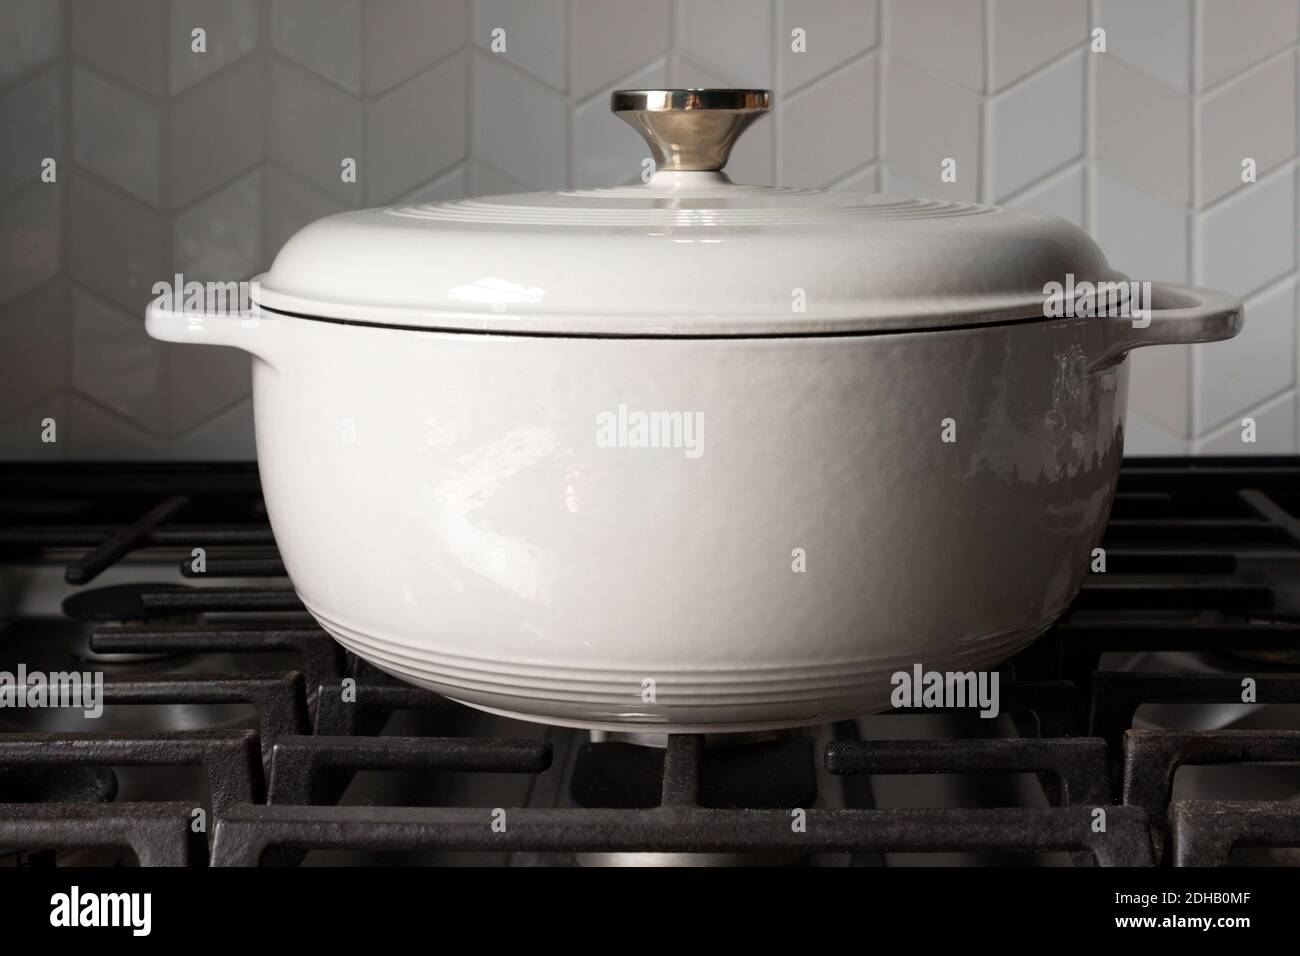 a large, white enameled cast iron crock pot on an unlit stove top with natural lighting and a chevron backsplash Stock Photo